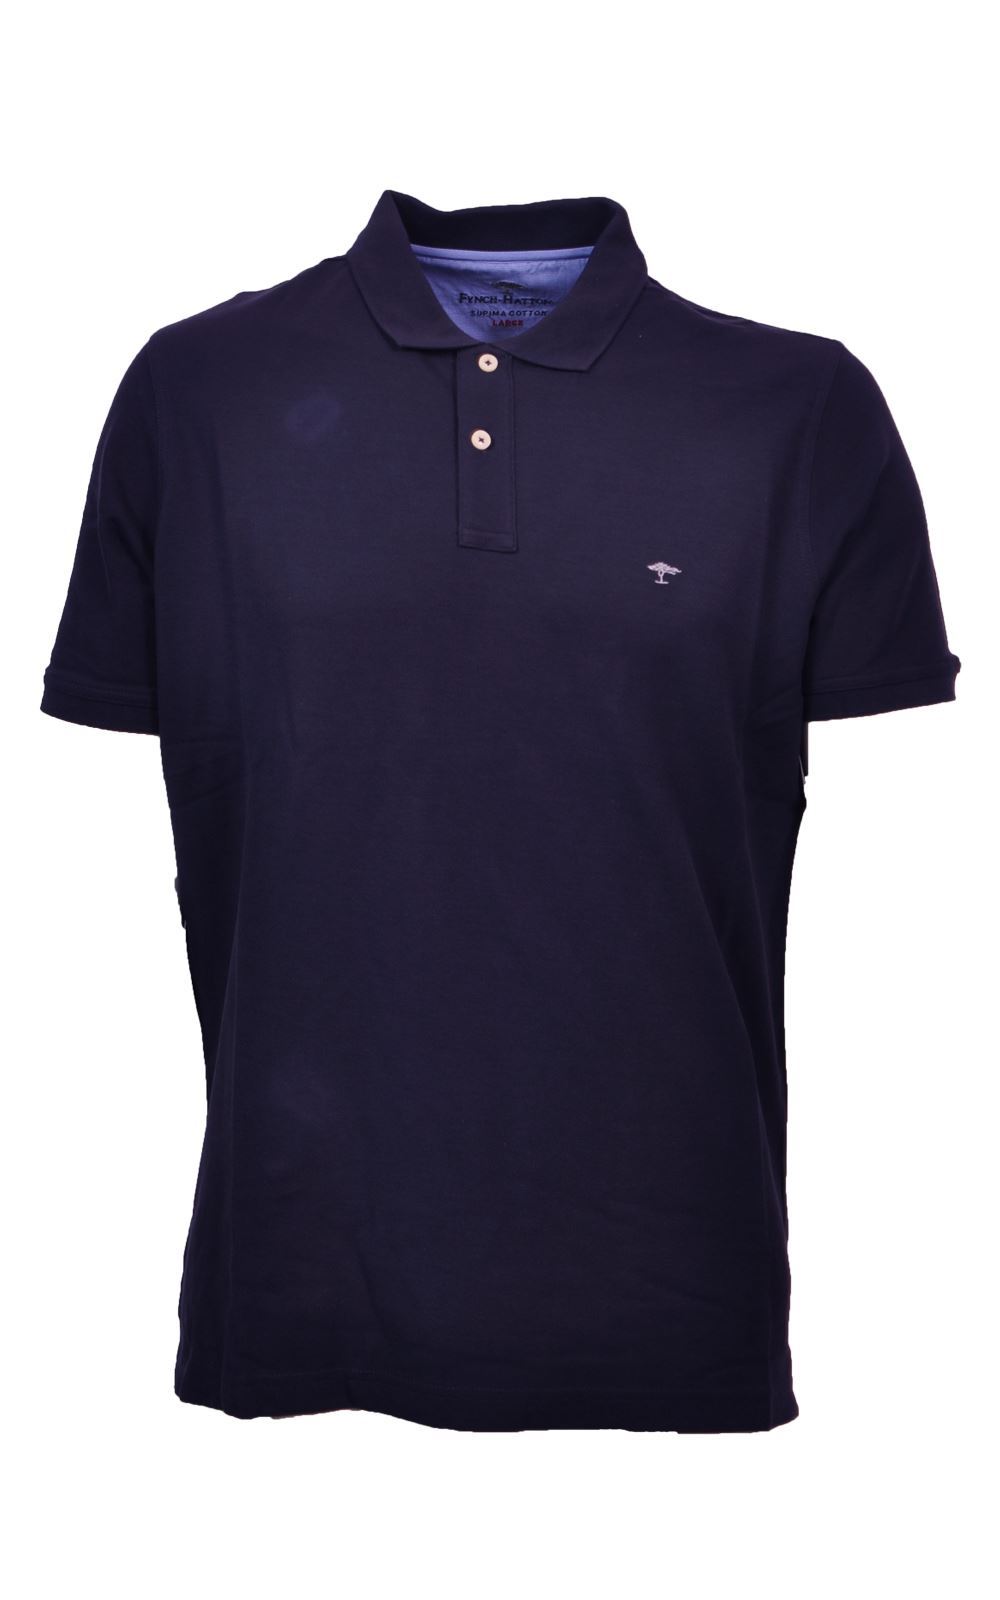 Picture of Fynch-Hatton Polo Shirt 1000-1700